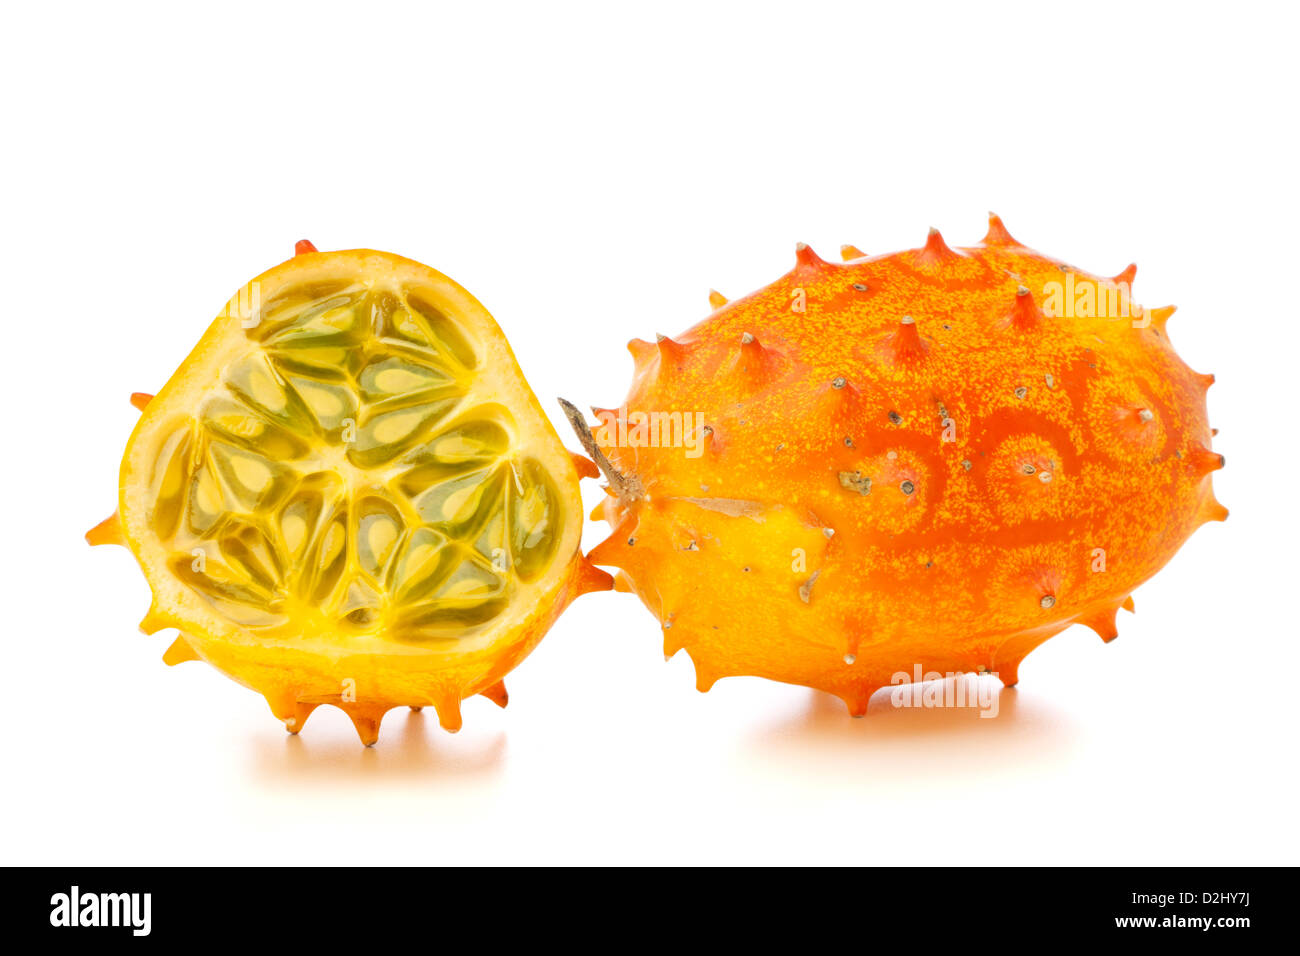 Whole and half Kiwano fruits, also called African Horned melon or Horned Cucumber, isolated on white background Stock Photo